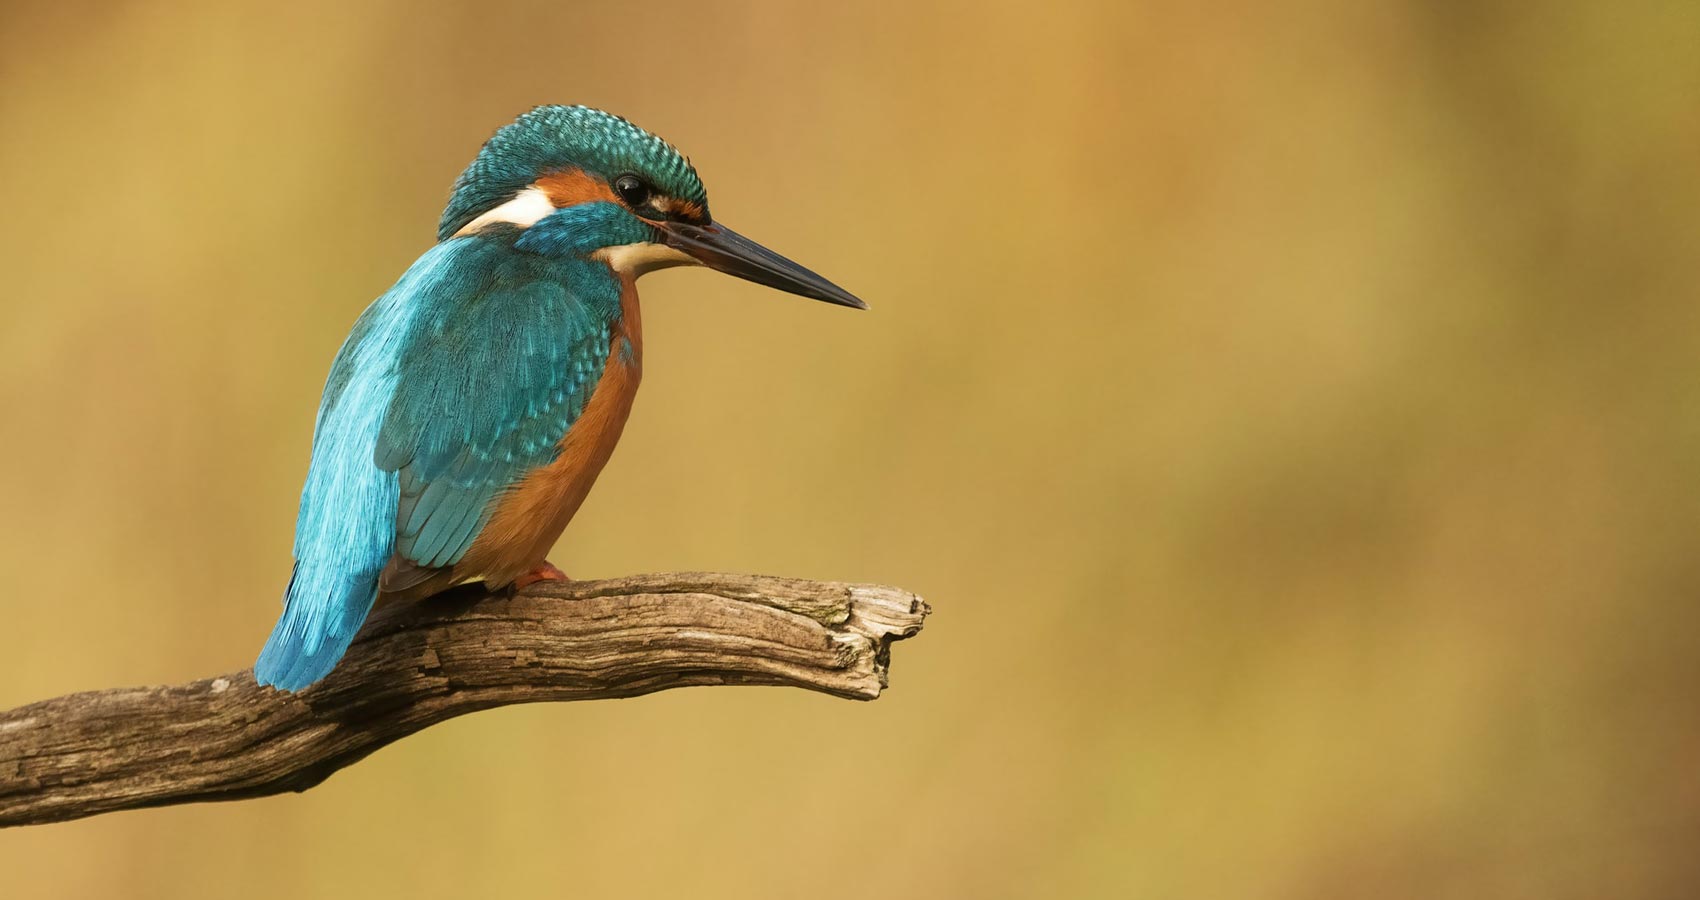 The Kingfisher, flash fiction by Jim Bates at Spillwords.com